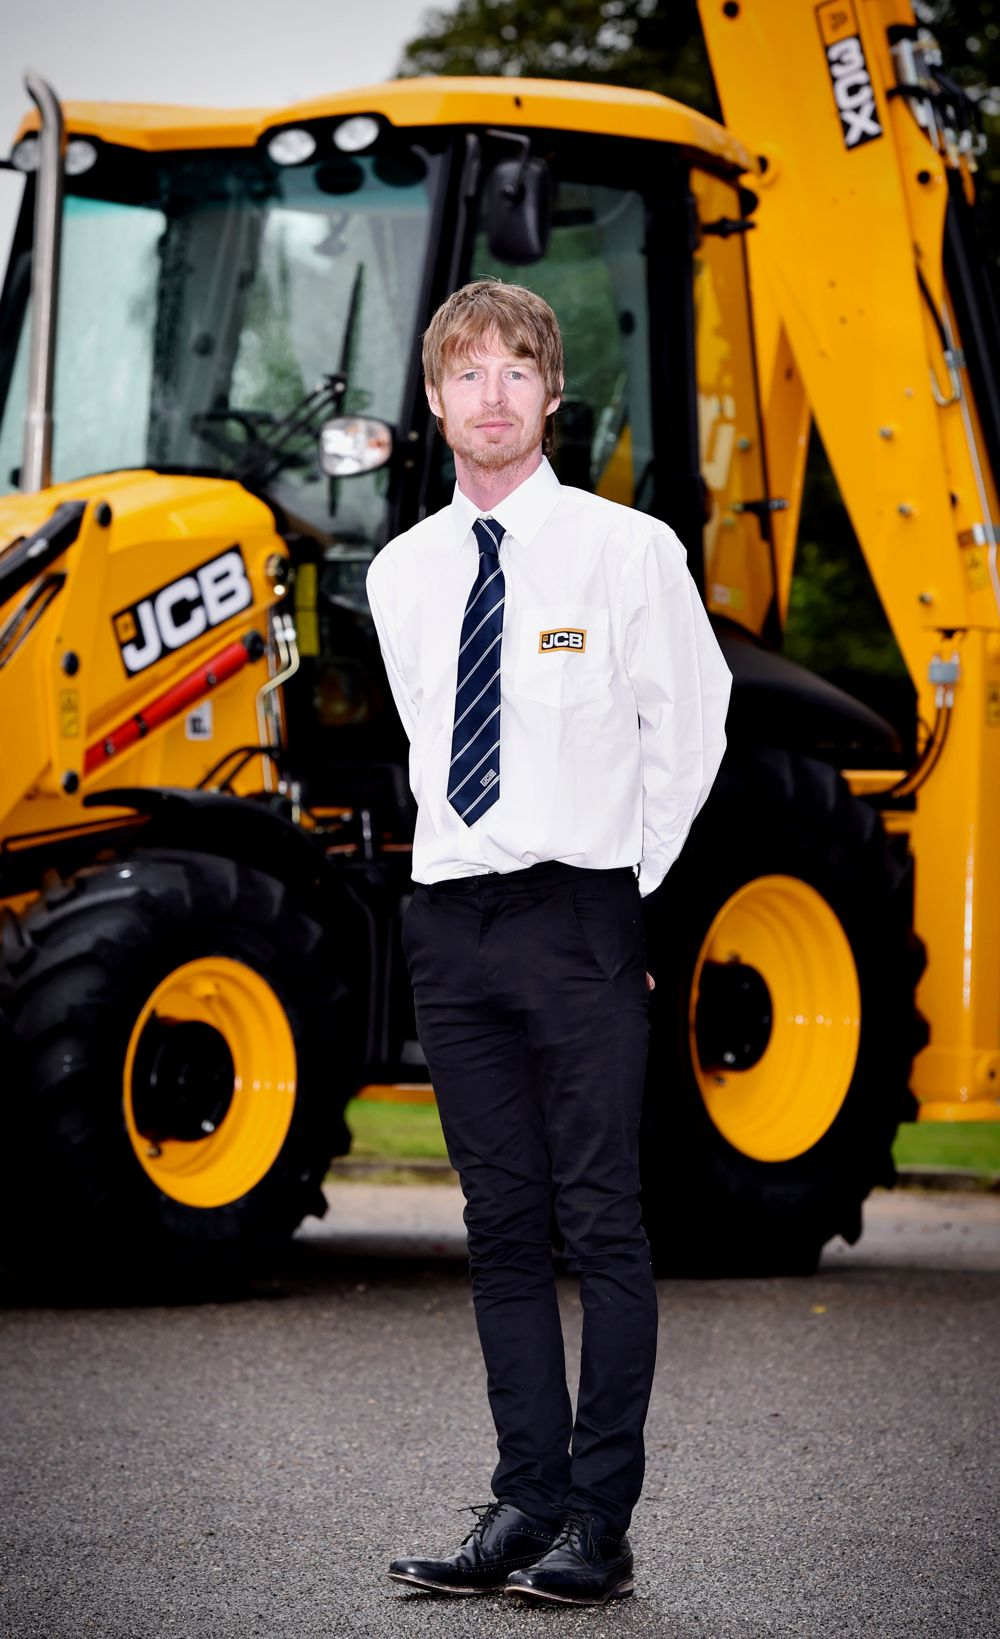 Former pub manager Joe Fee starts his new career as an apprentice at JCB.